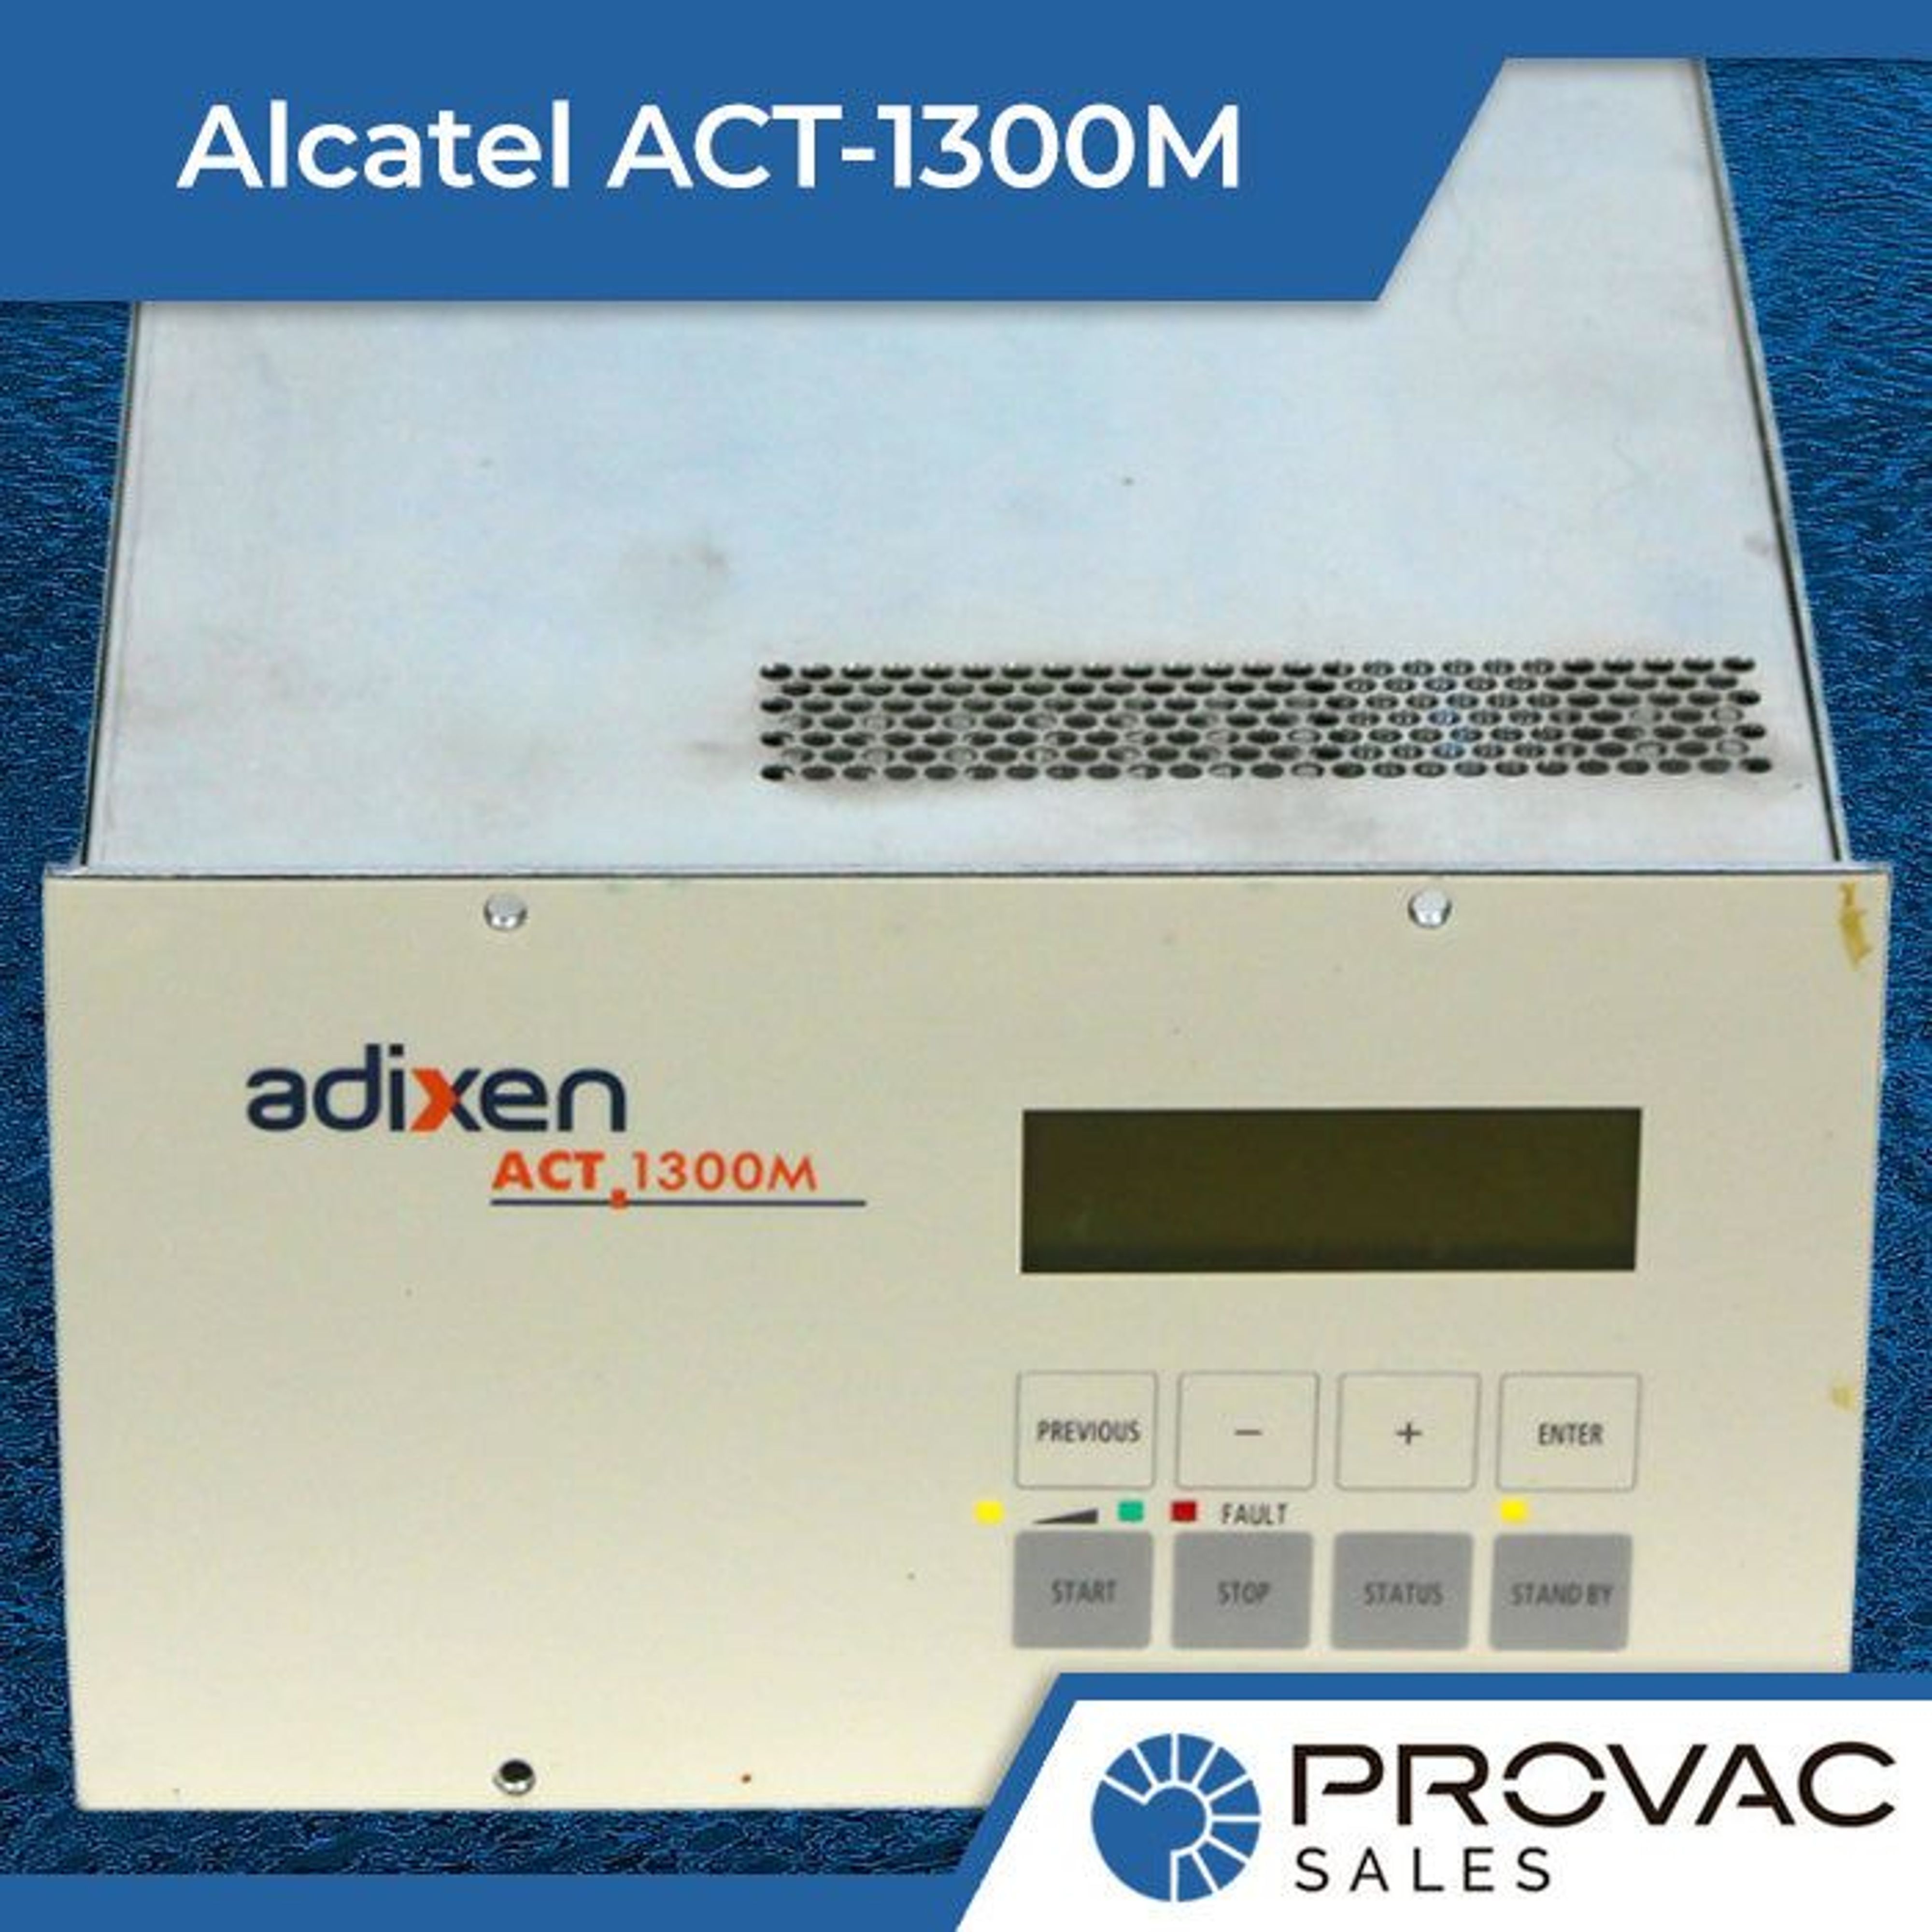 Alcatel ACT-1300M Turbo Pump Controller Background